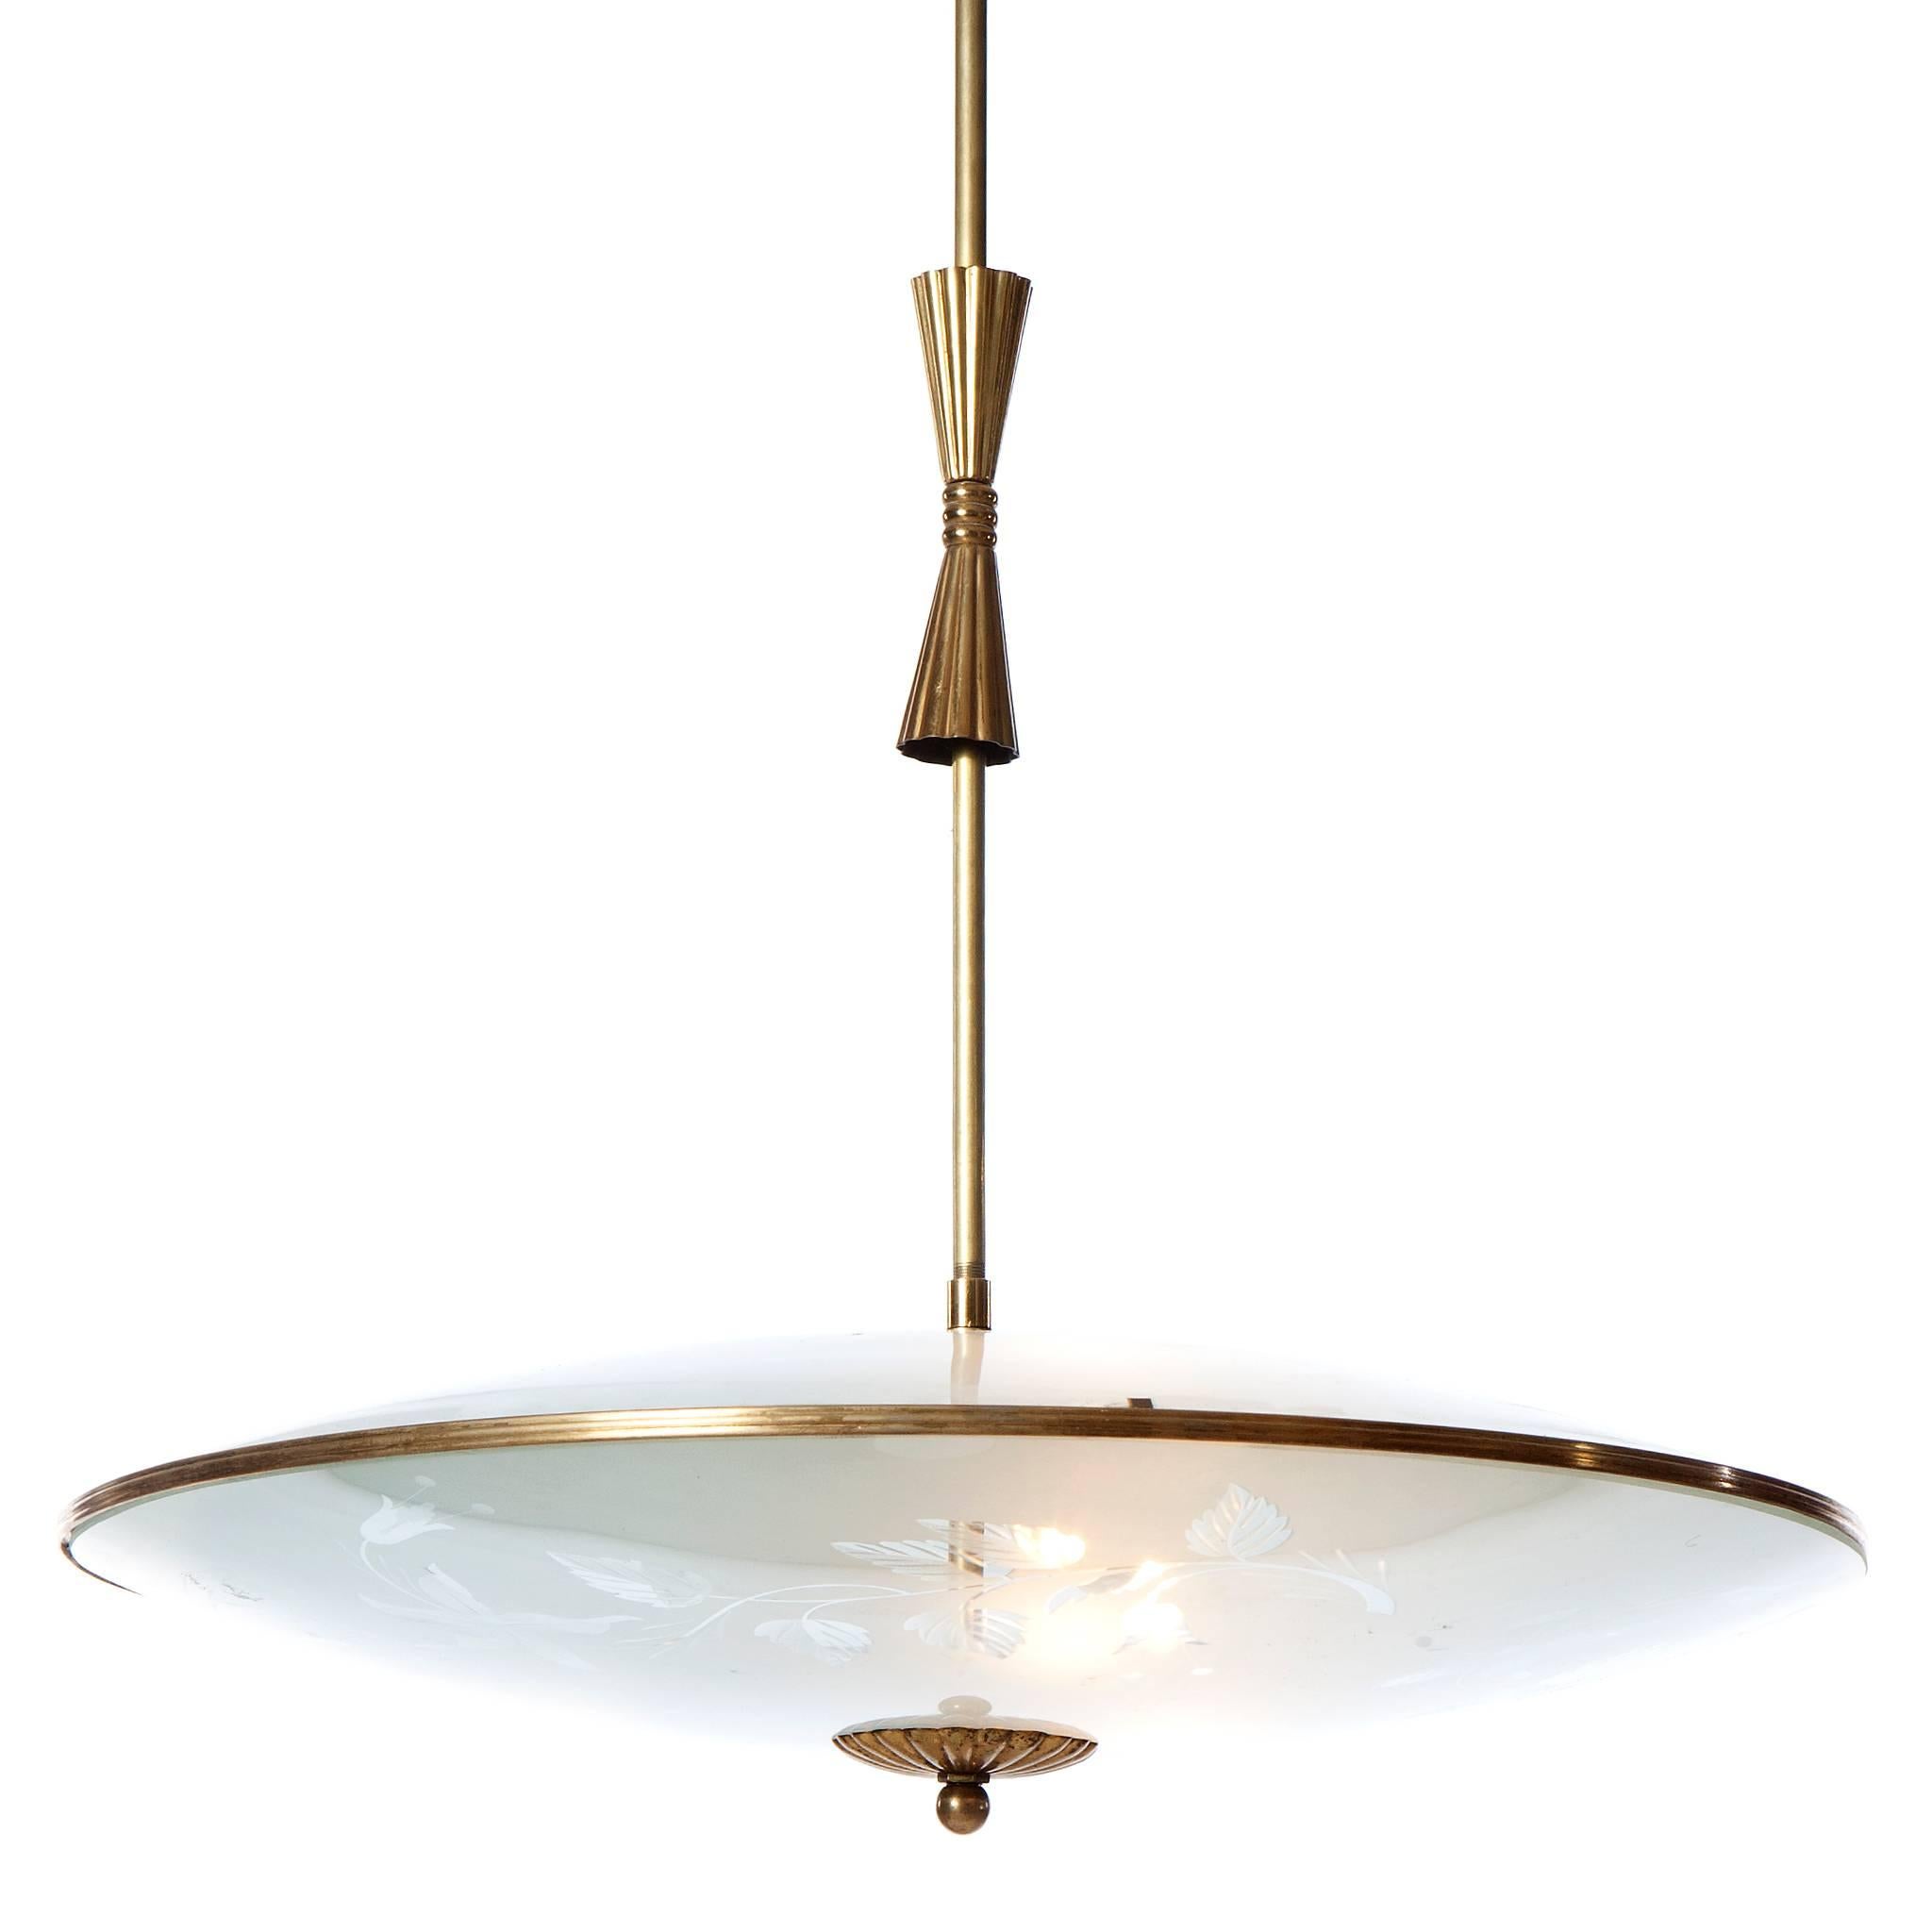 1940s Three-Light Brass and Glass Pendant by Fontana Attributed to Pietro Chiesa